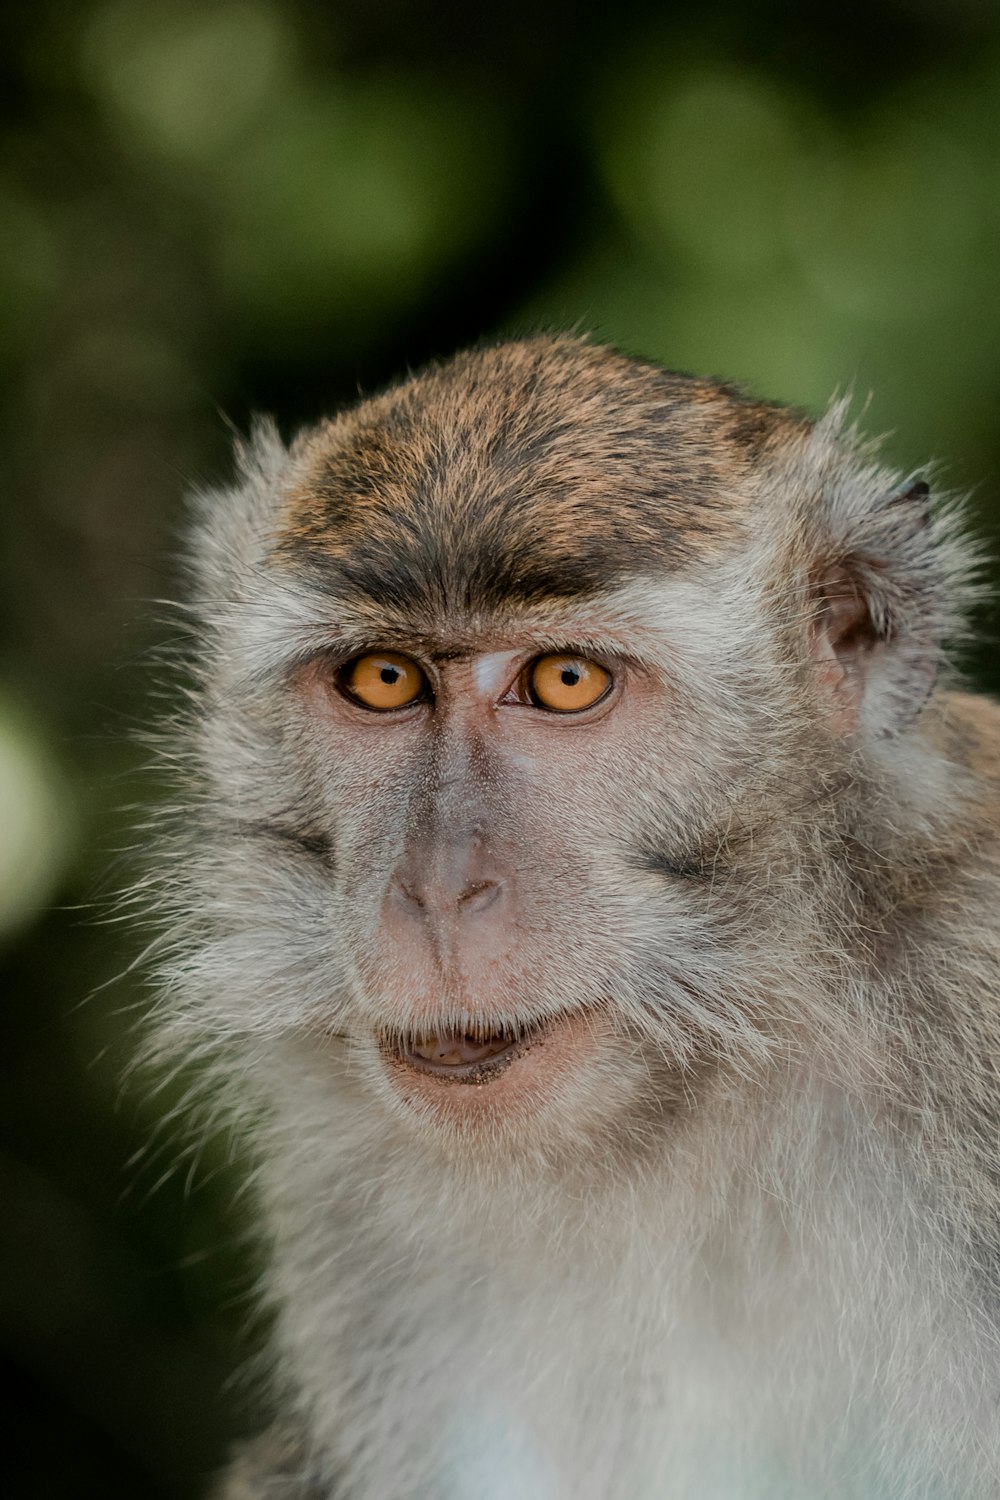 A close up picture of a balinese monkey